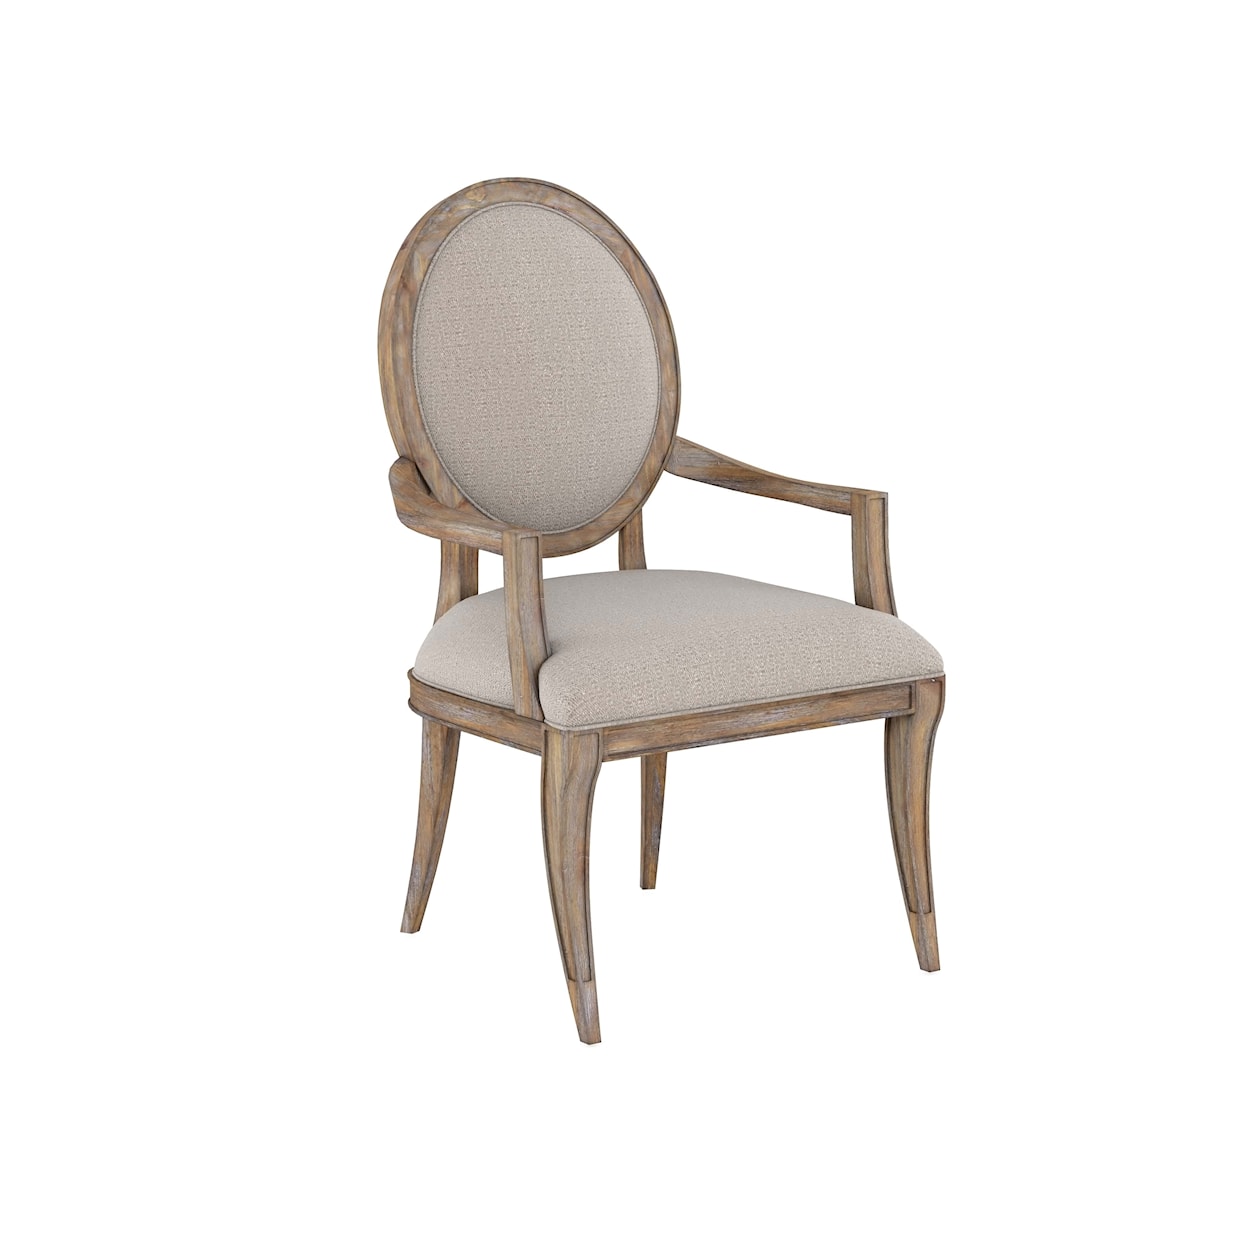 A.R.T. Furniture Inc Architrave Oval Arm Chair